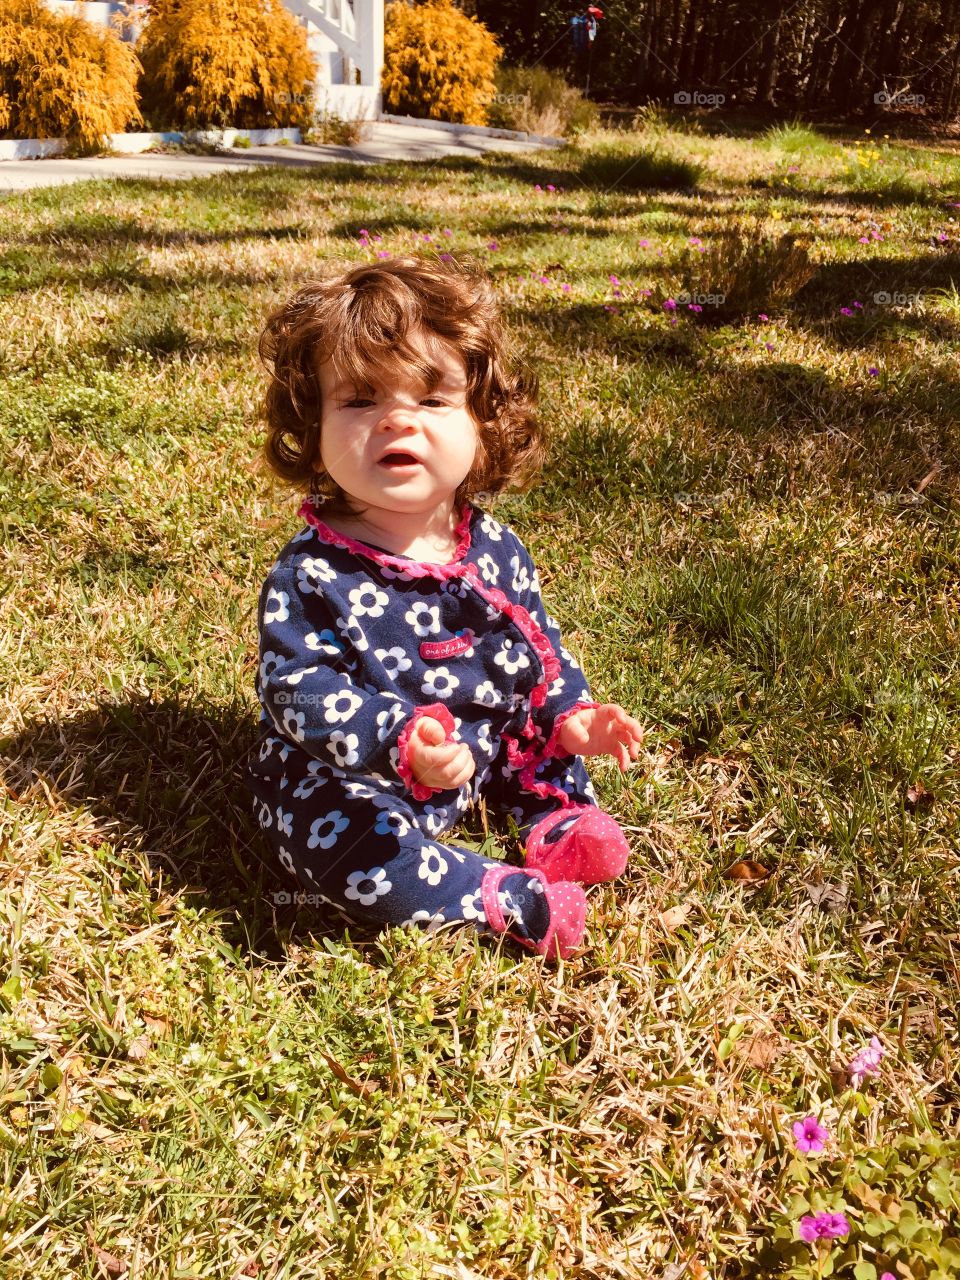 My baby sister in some grass